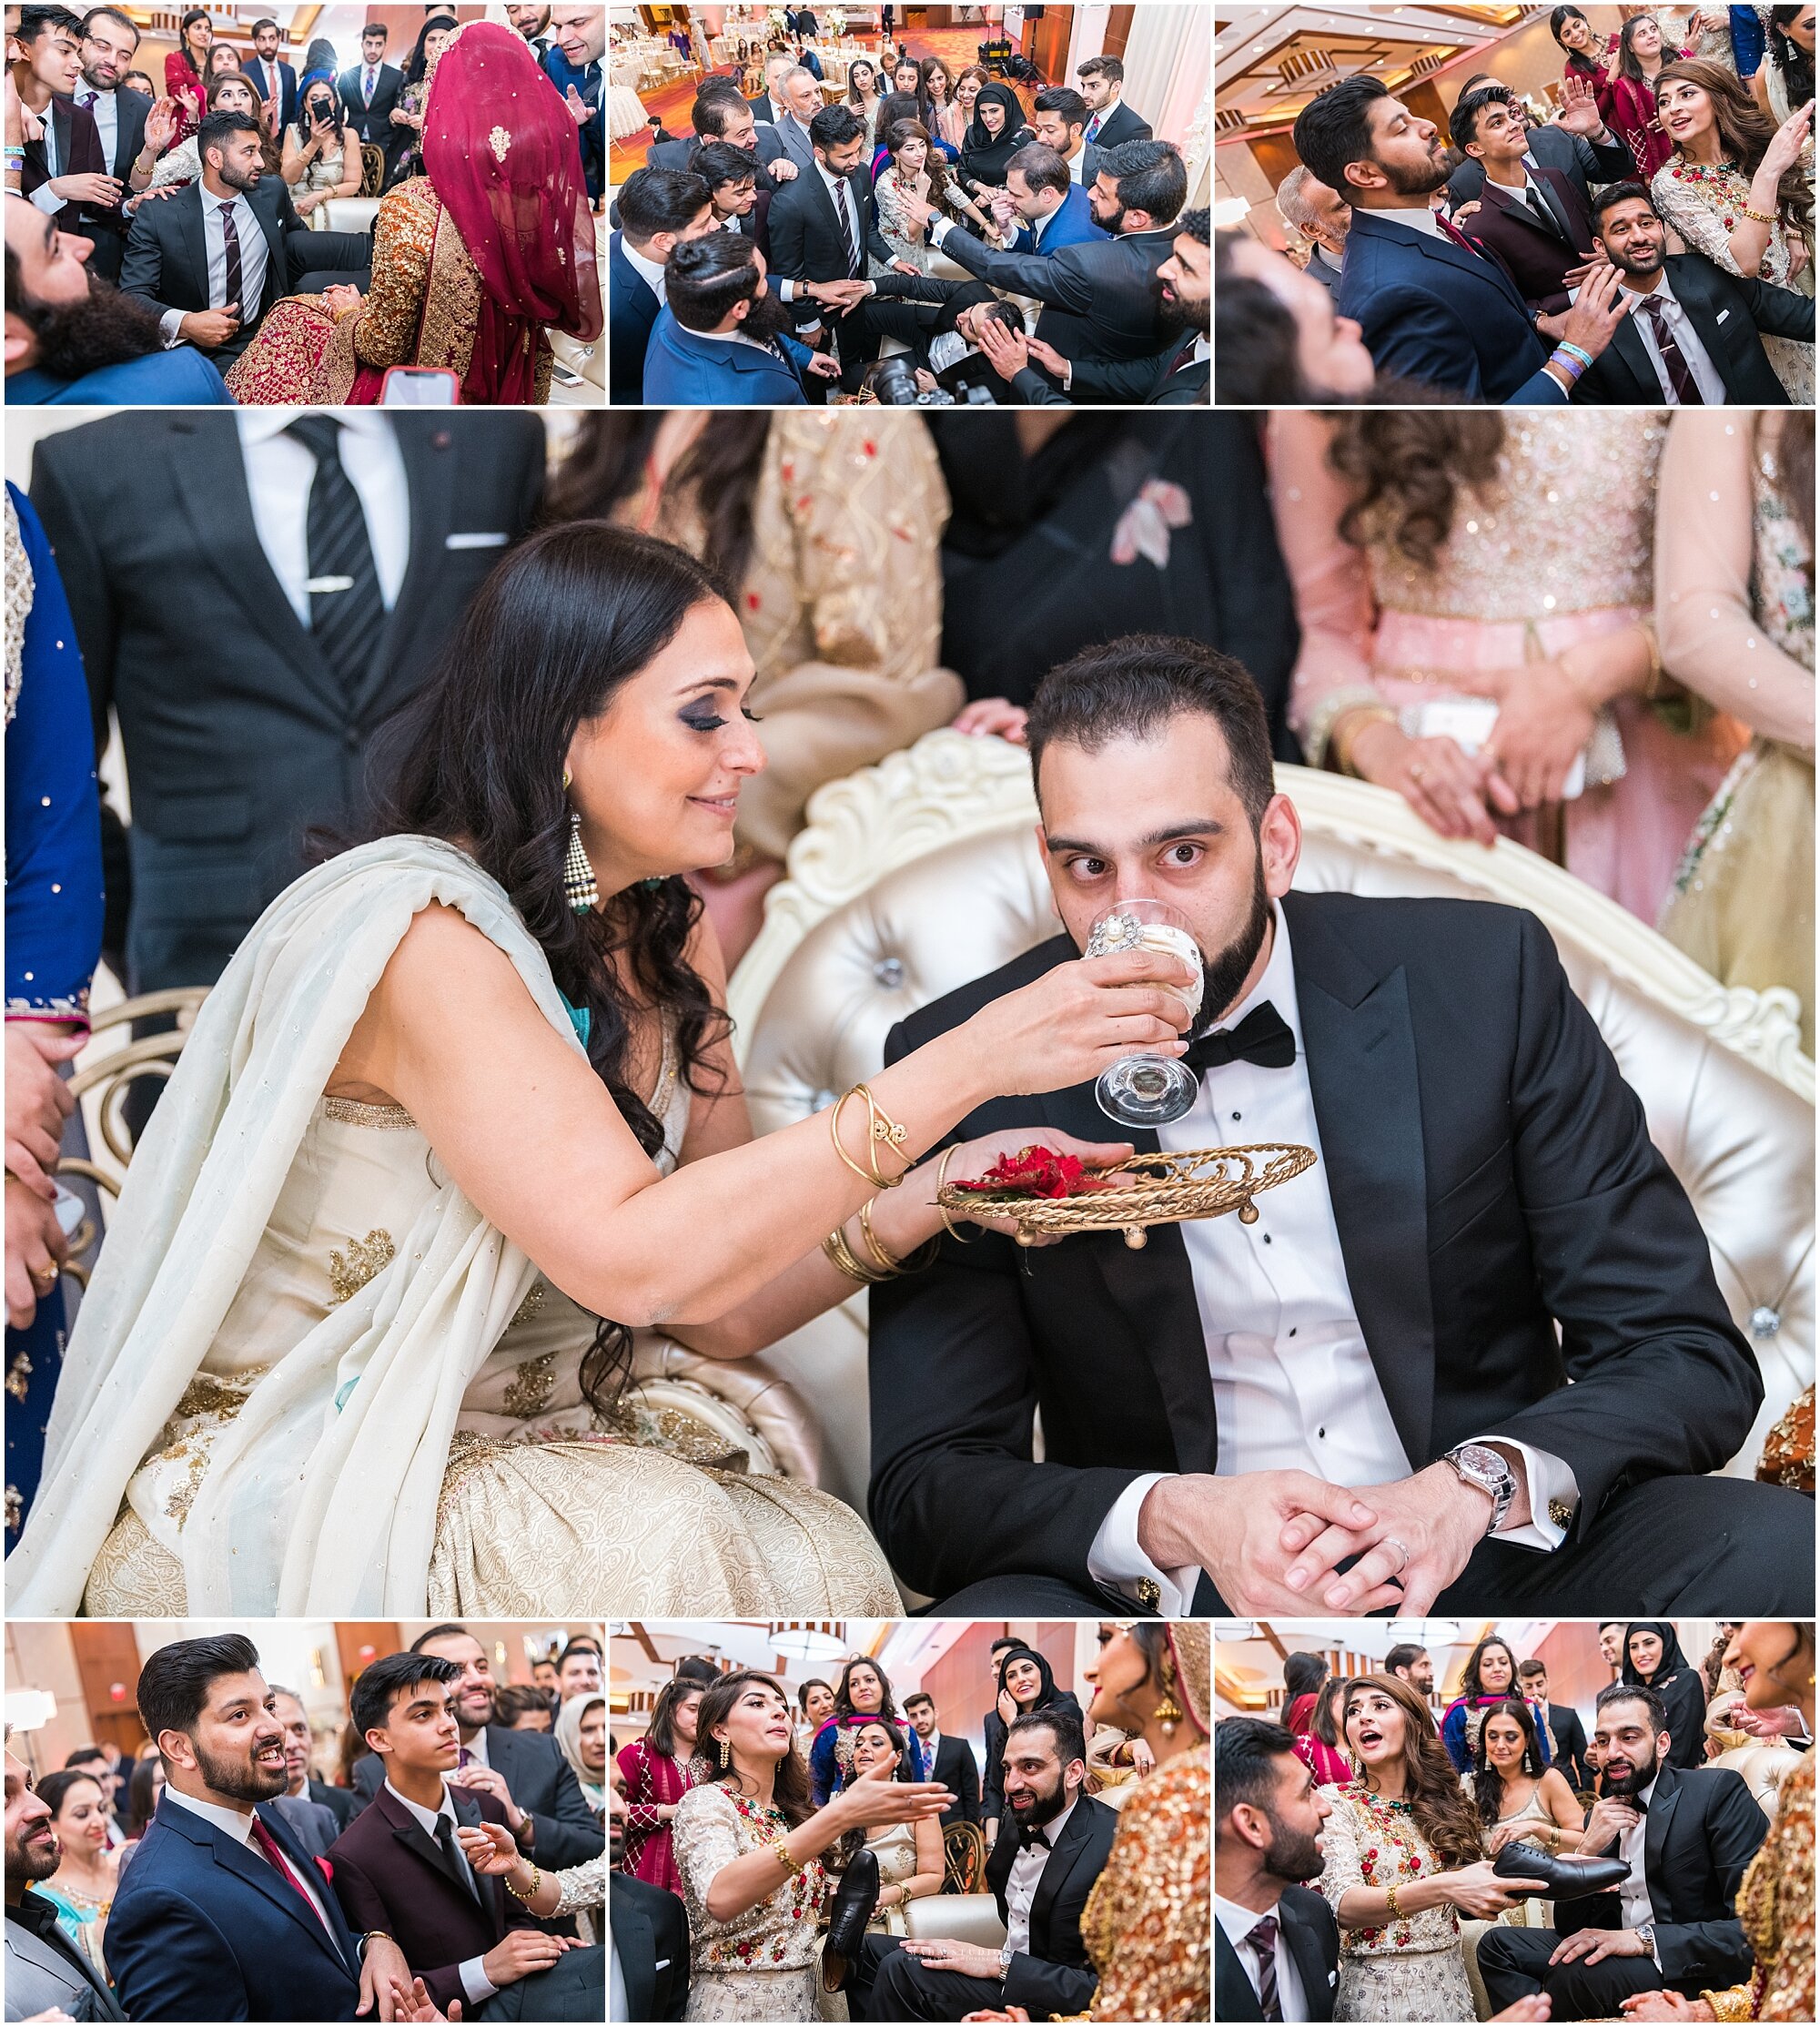 Traditional Pakistani wedding traditions during a wedding such as jhoota Chupai and dhood pilai